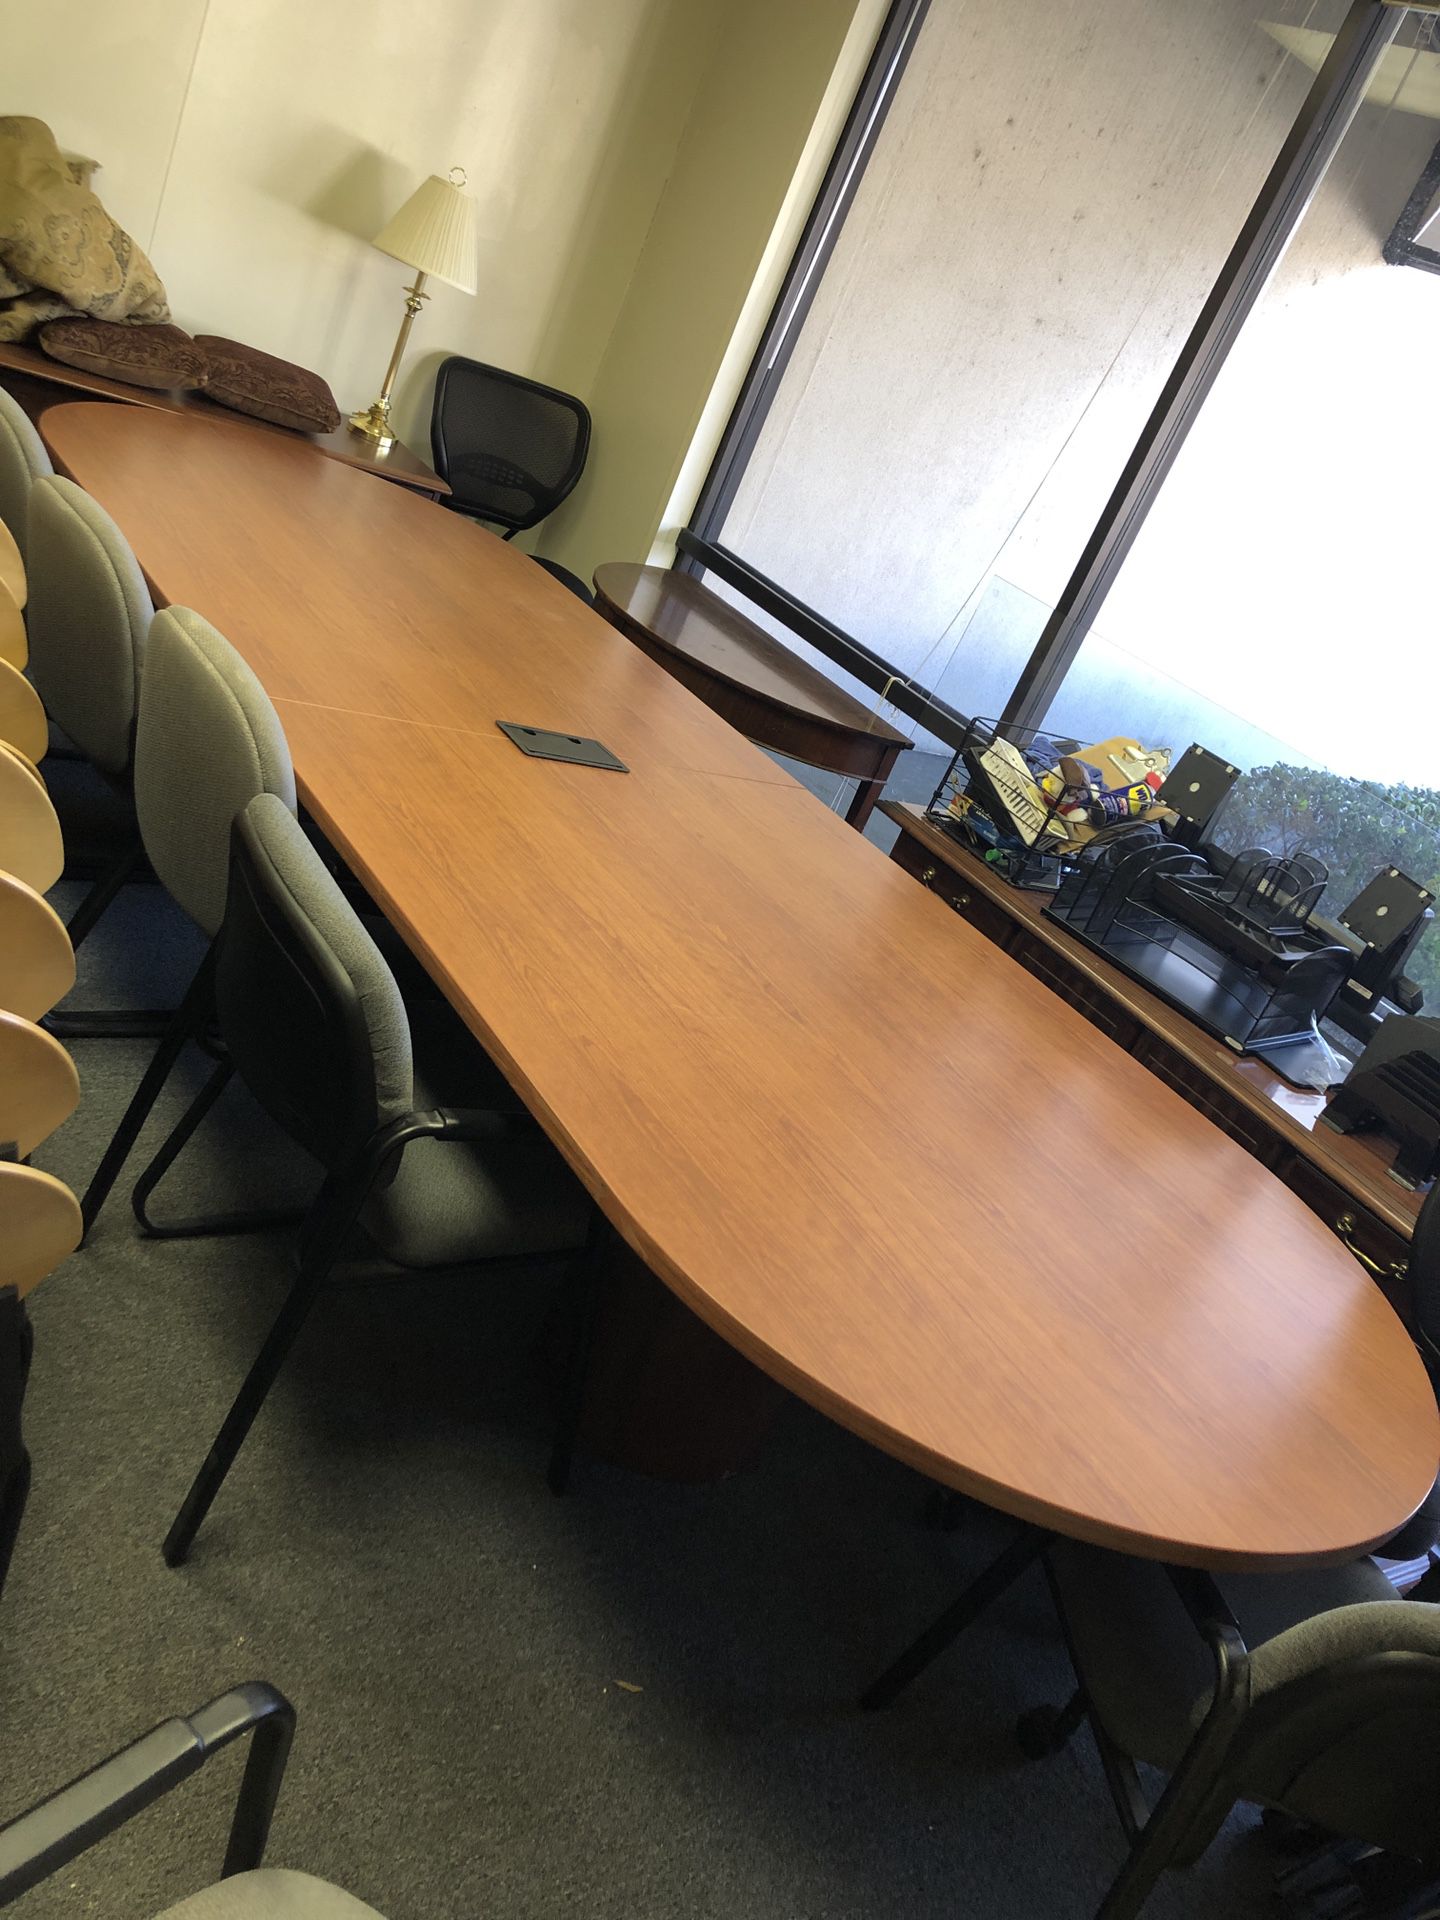 12 foot conference table with power